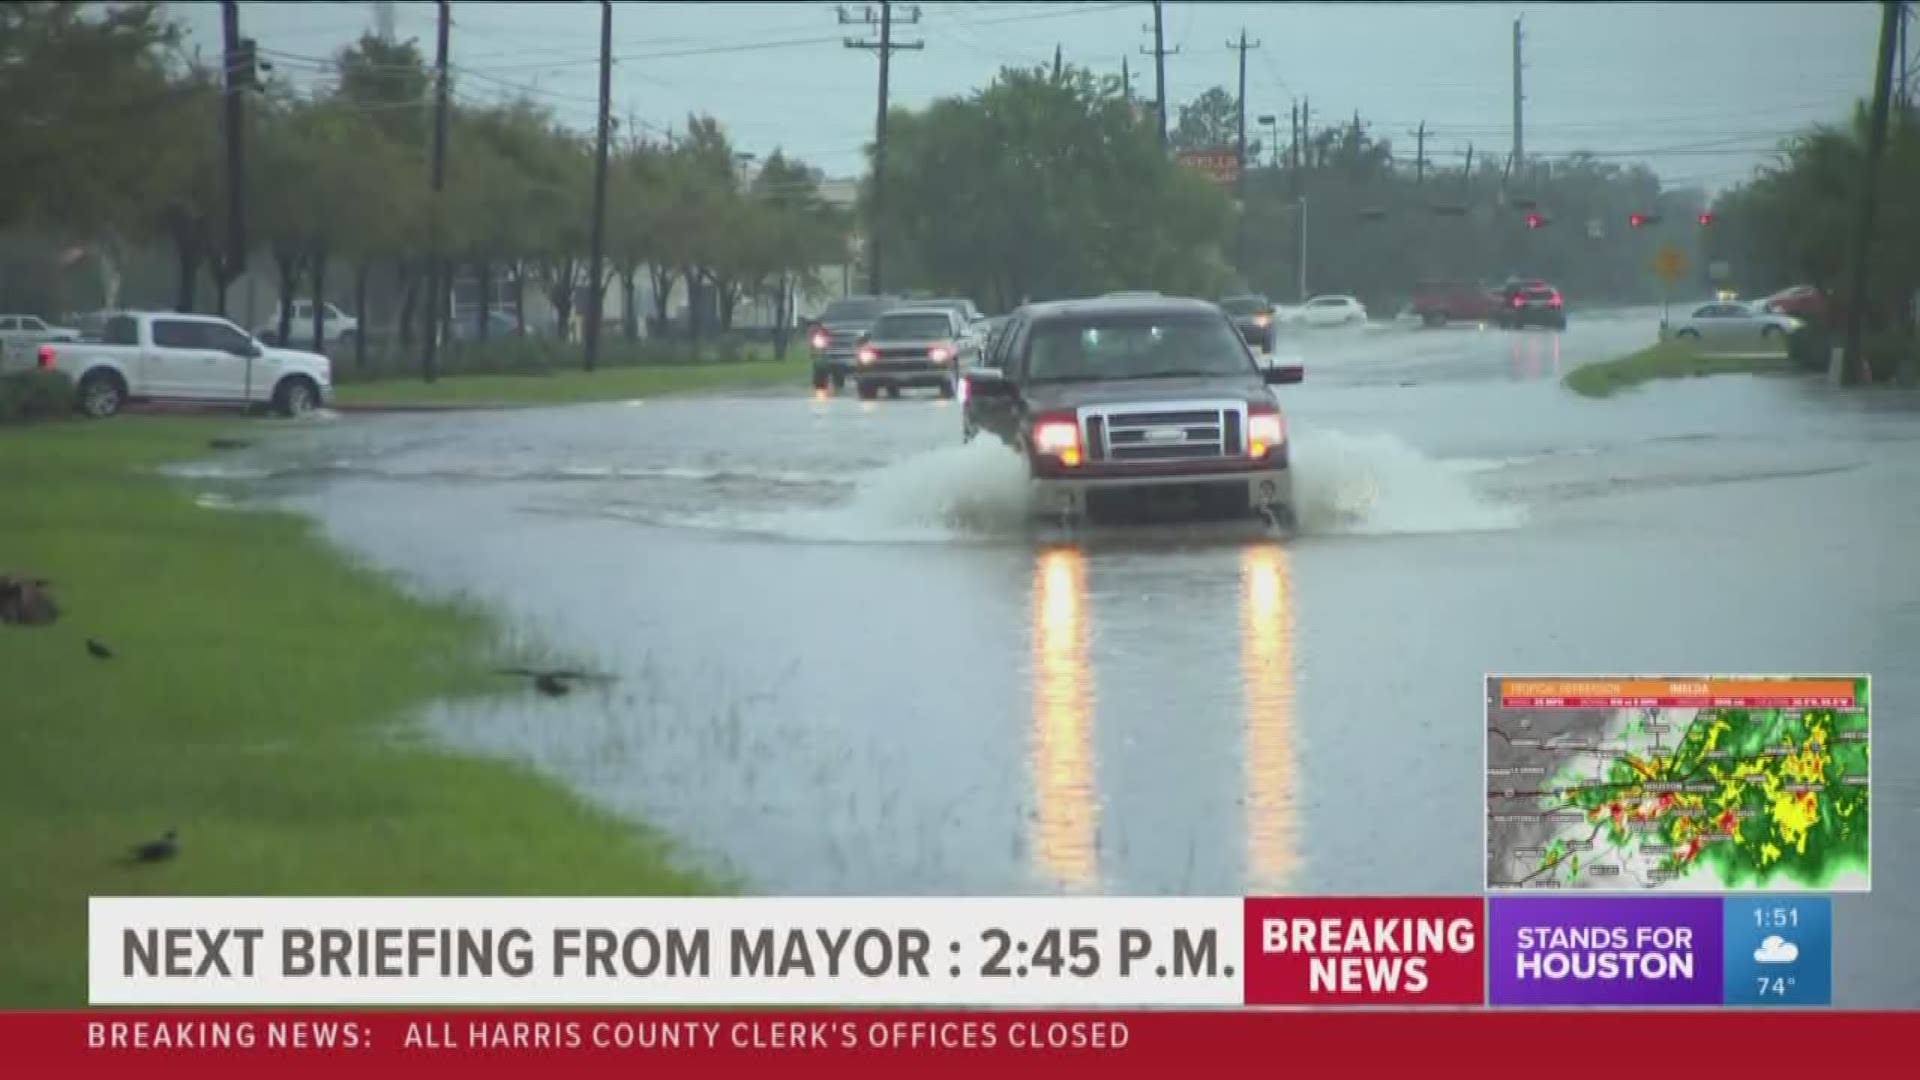 One stranded driver said he didn't expect the water to be so deep and urged other drivers to stay off the roads.